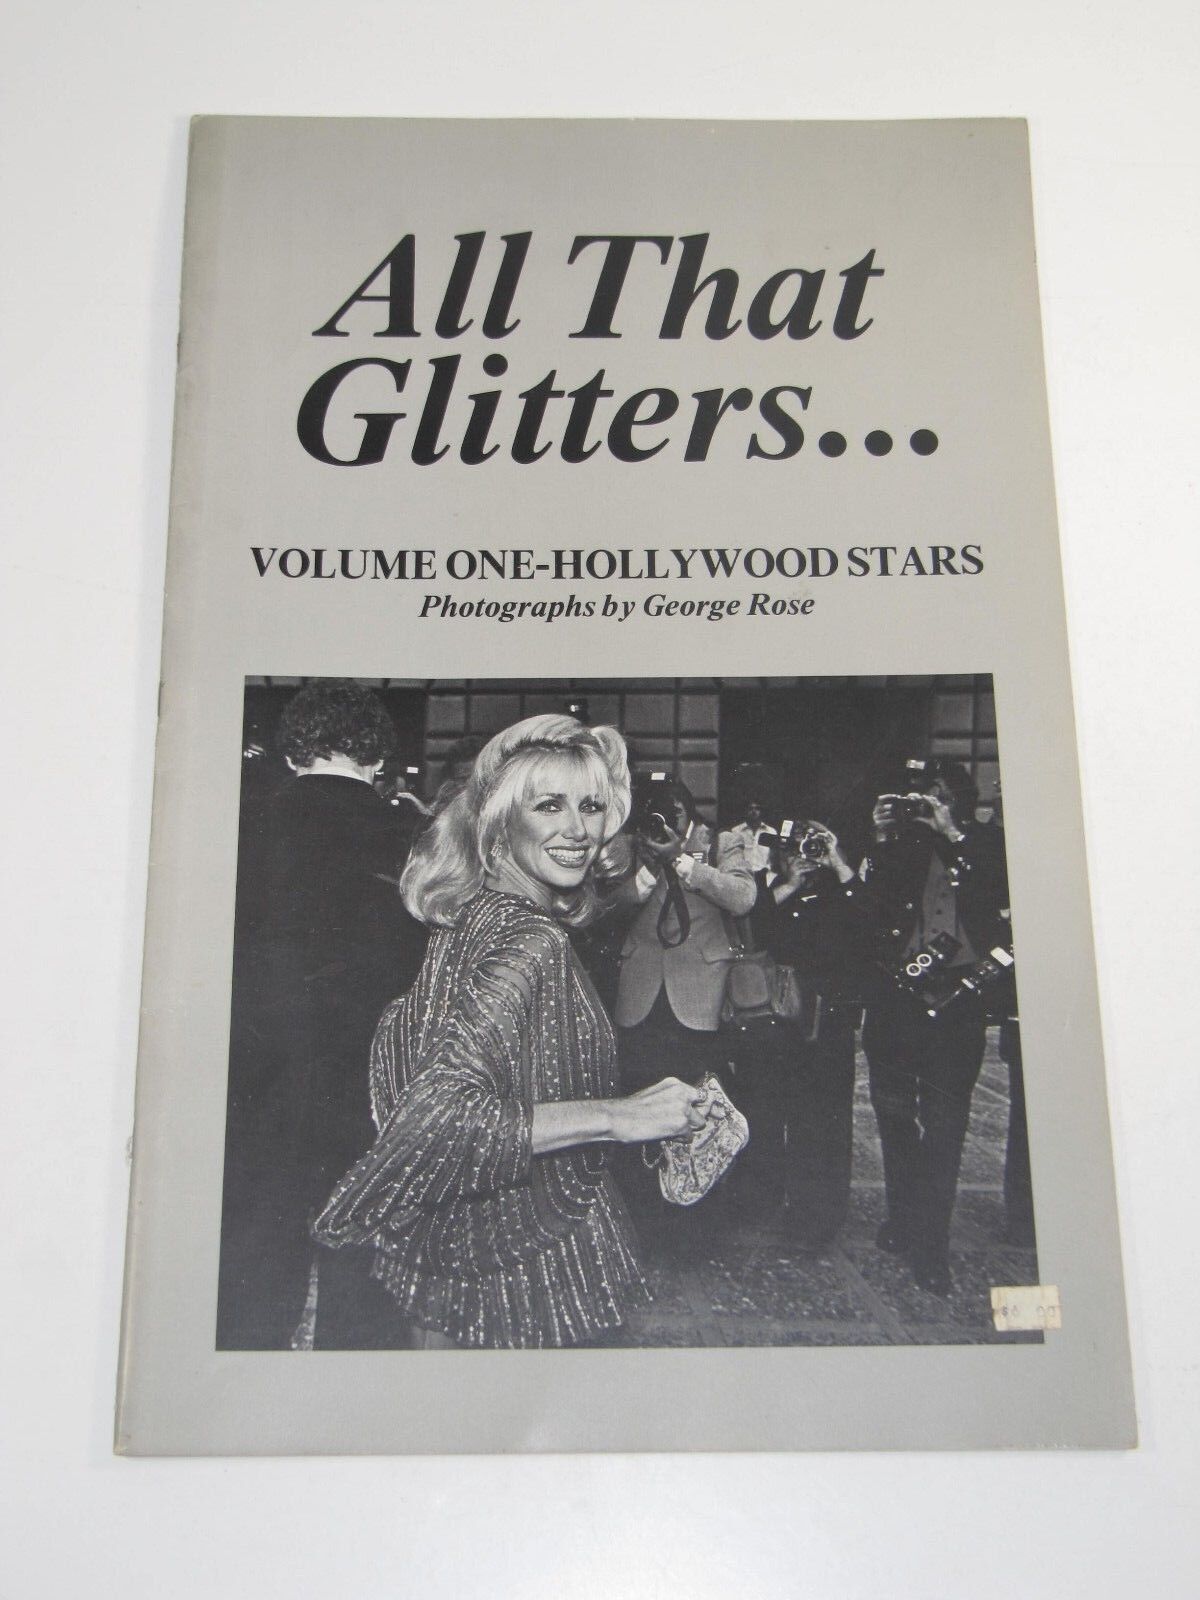 All That Glitters-Vol 1-Hollywood Stars-Huge Photographs 1980 George Rose 11x17